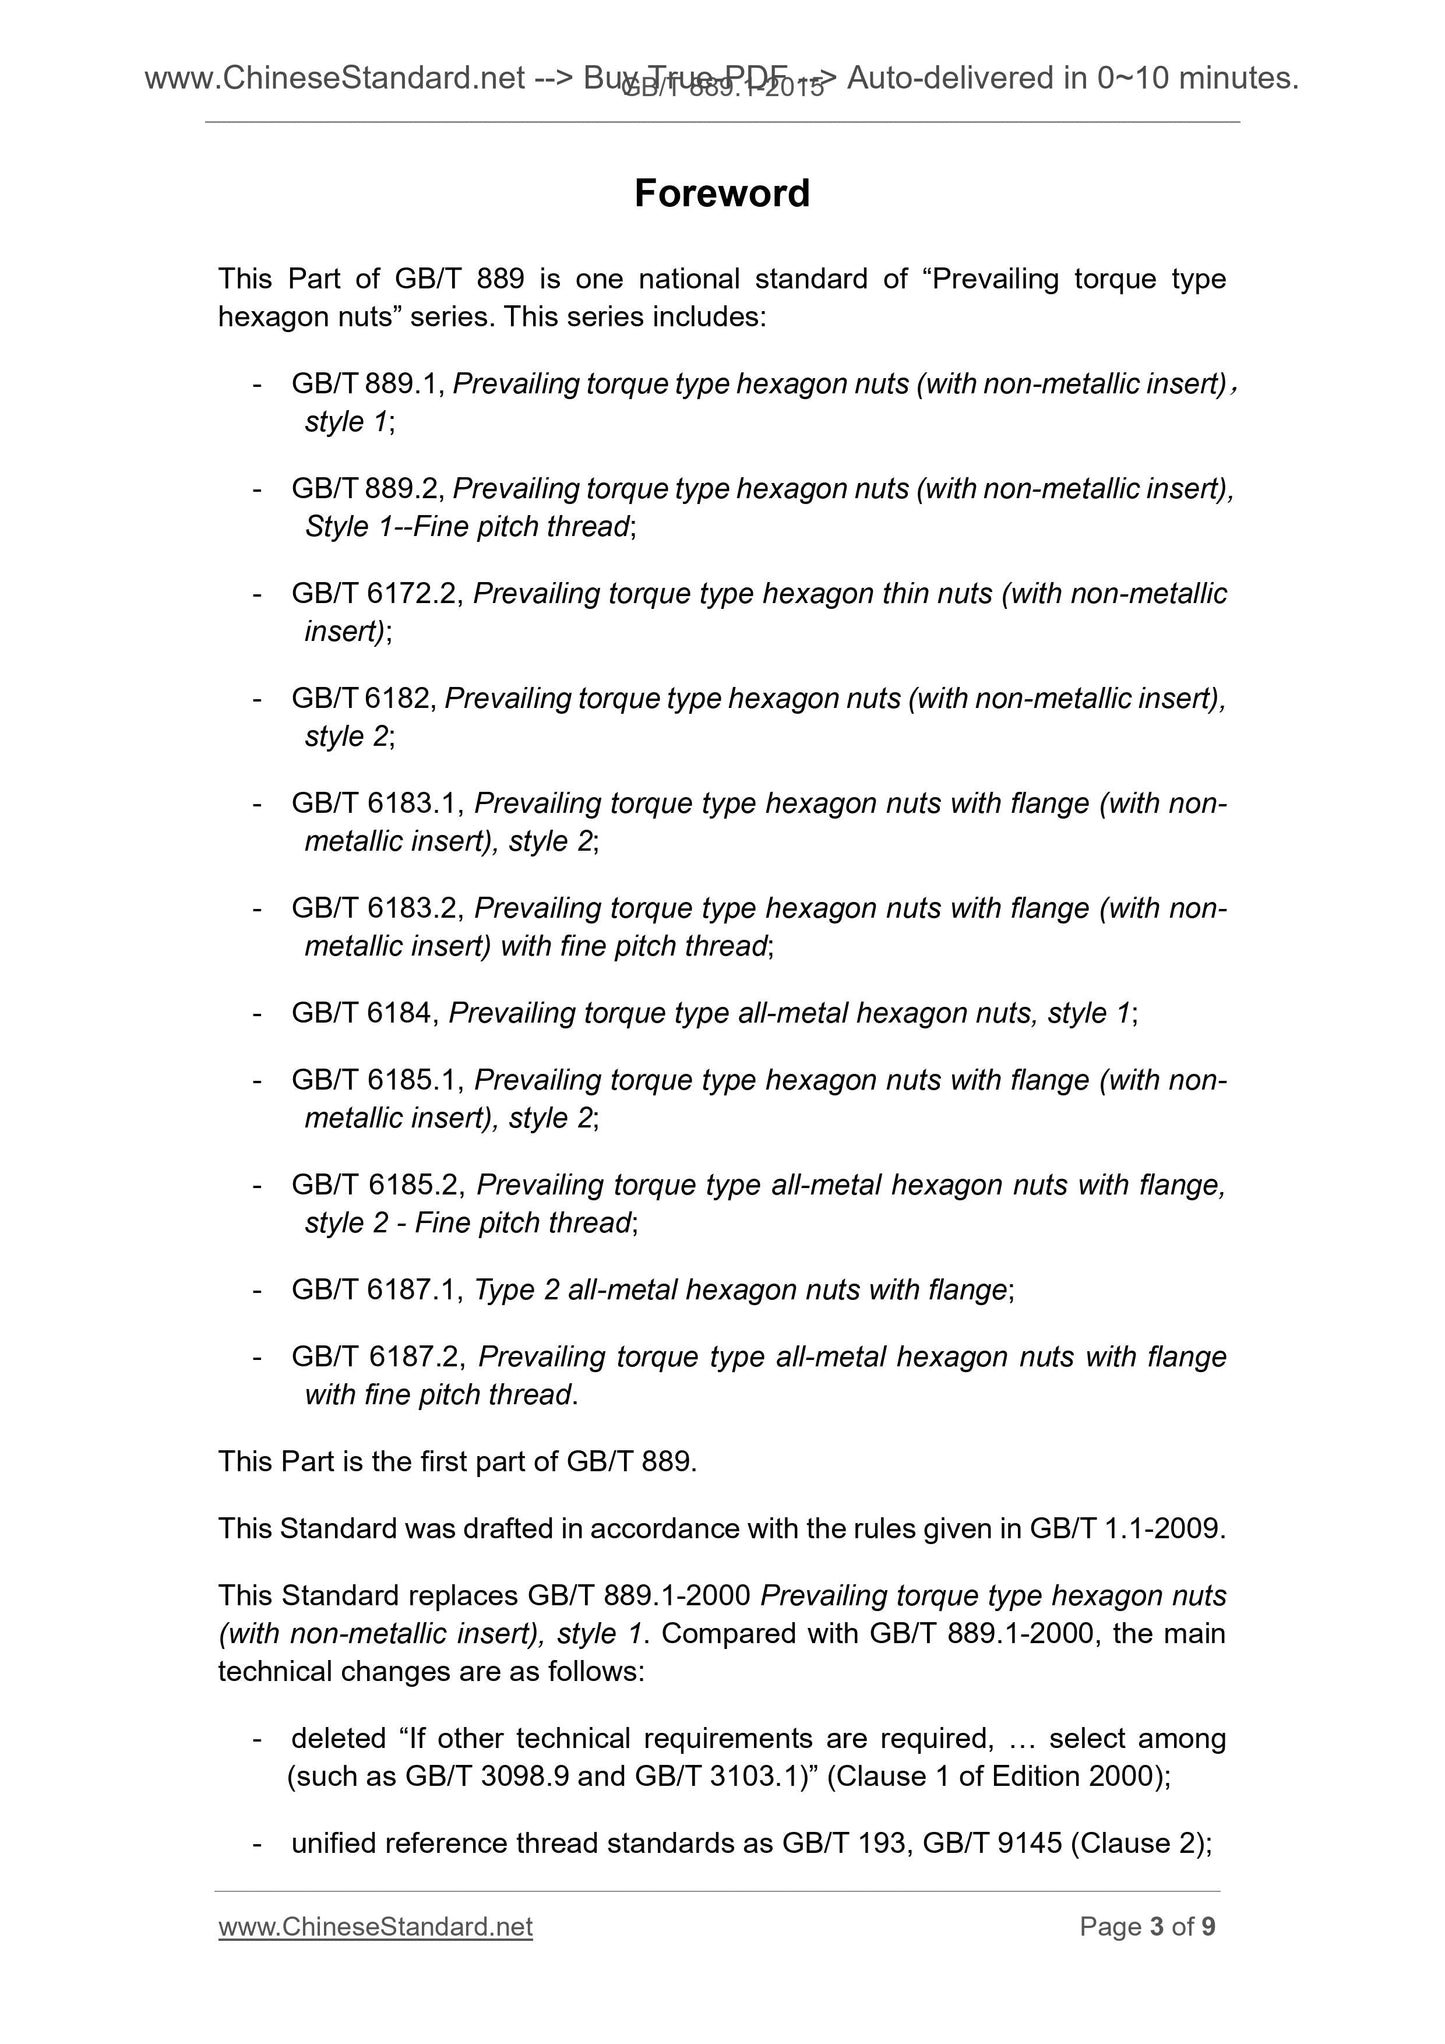 GB/T 889.1-2015 Page 3